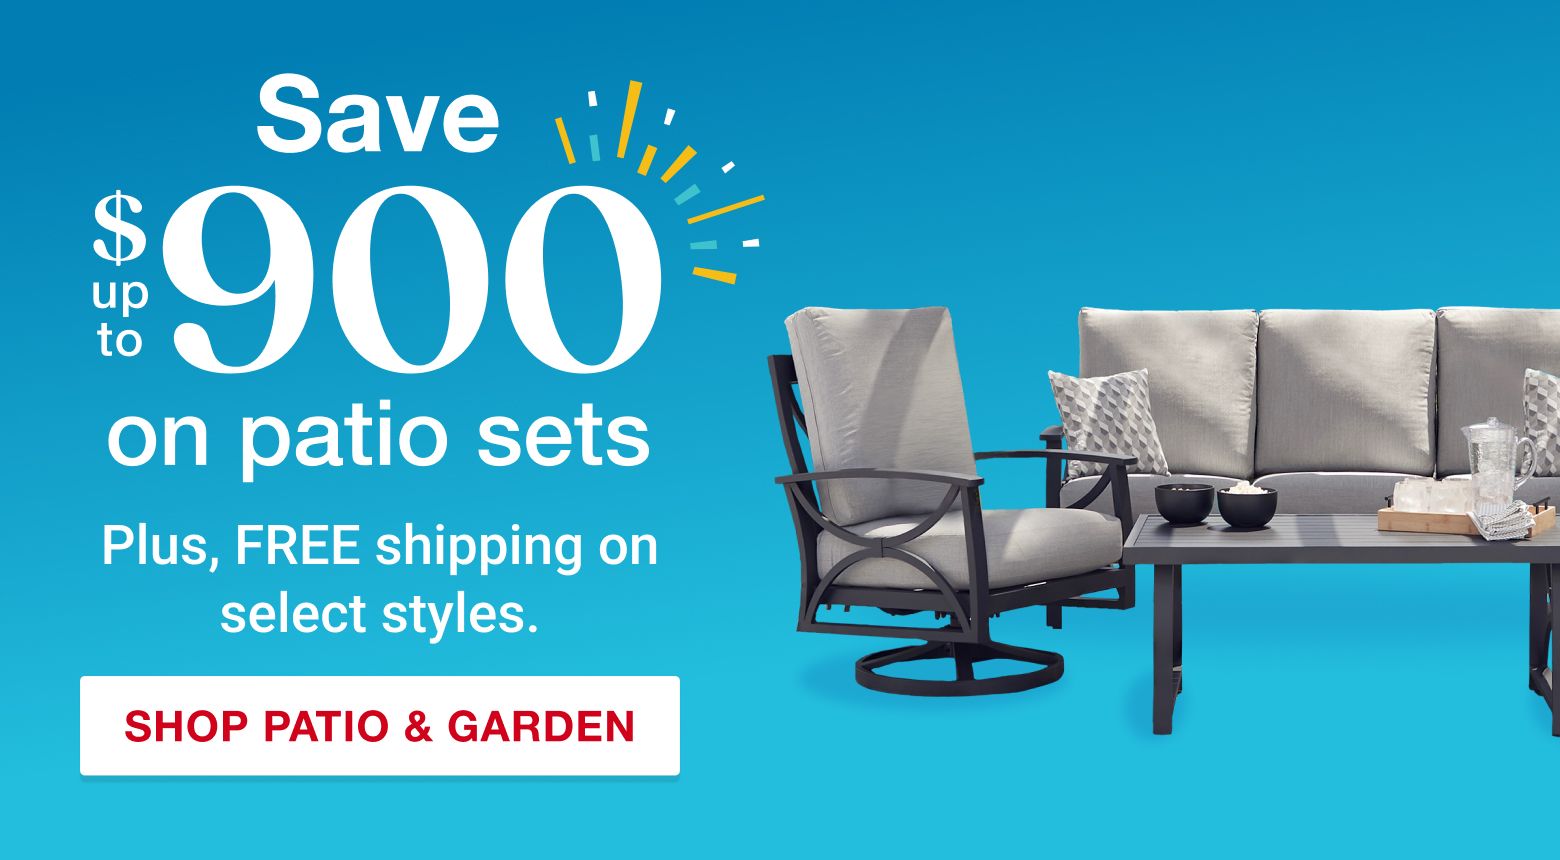 Save up to $900 on patio sets. Plus, free shipping on select styles. Shop Patio and Garden